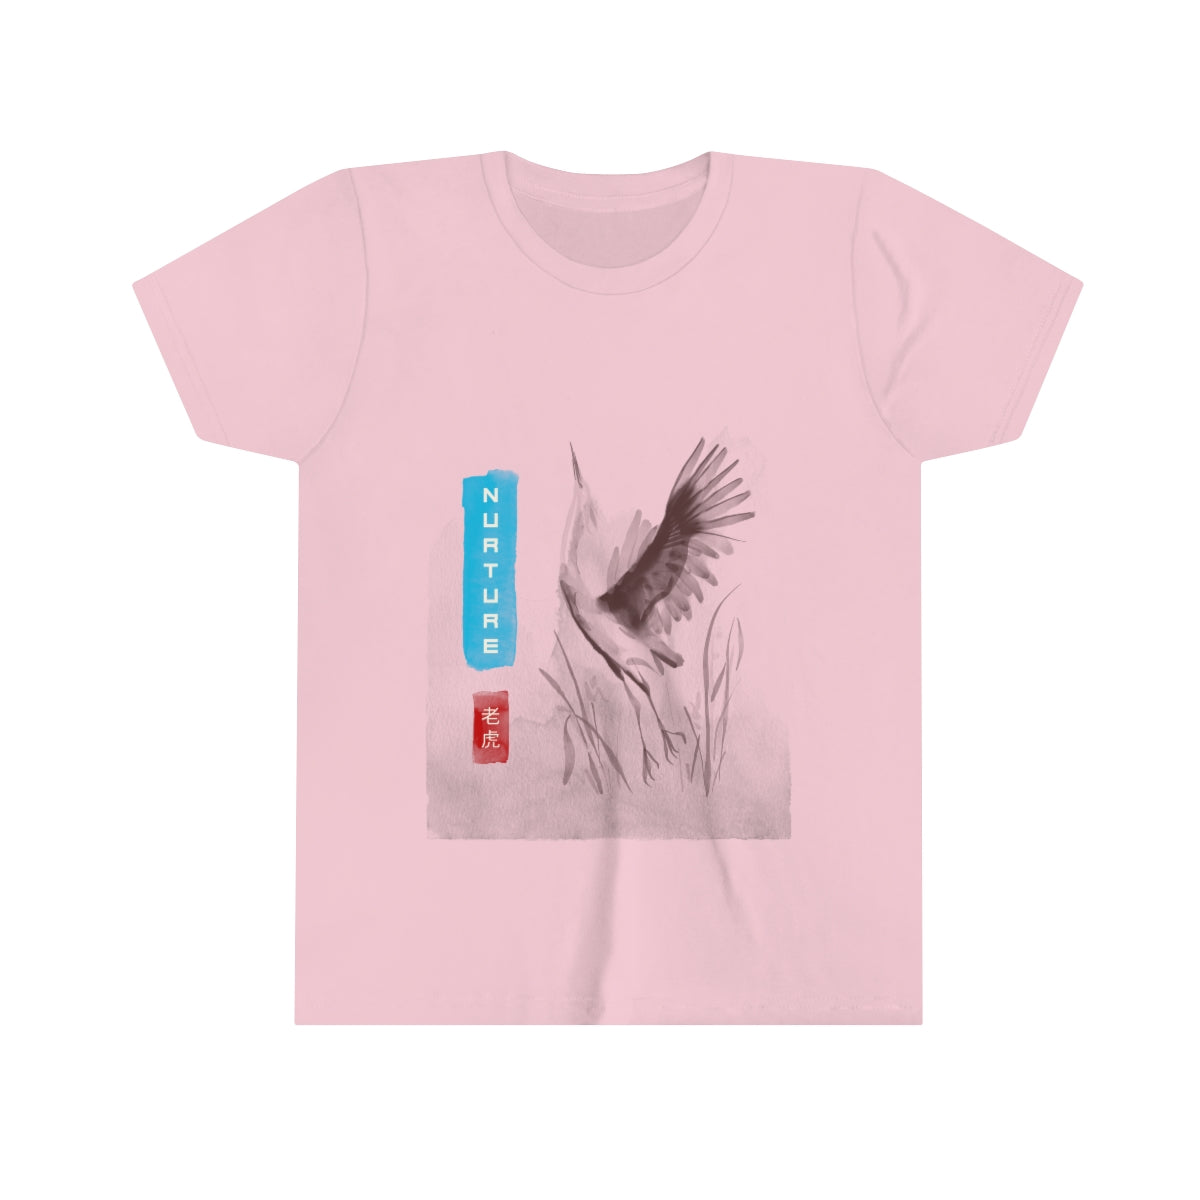 Youth Family Proclamation Nurture Shirt with Crane - Short Sleeve Tee